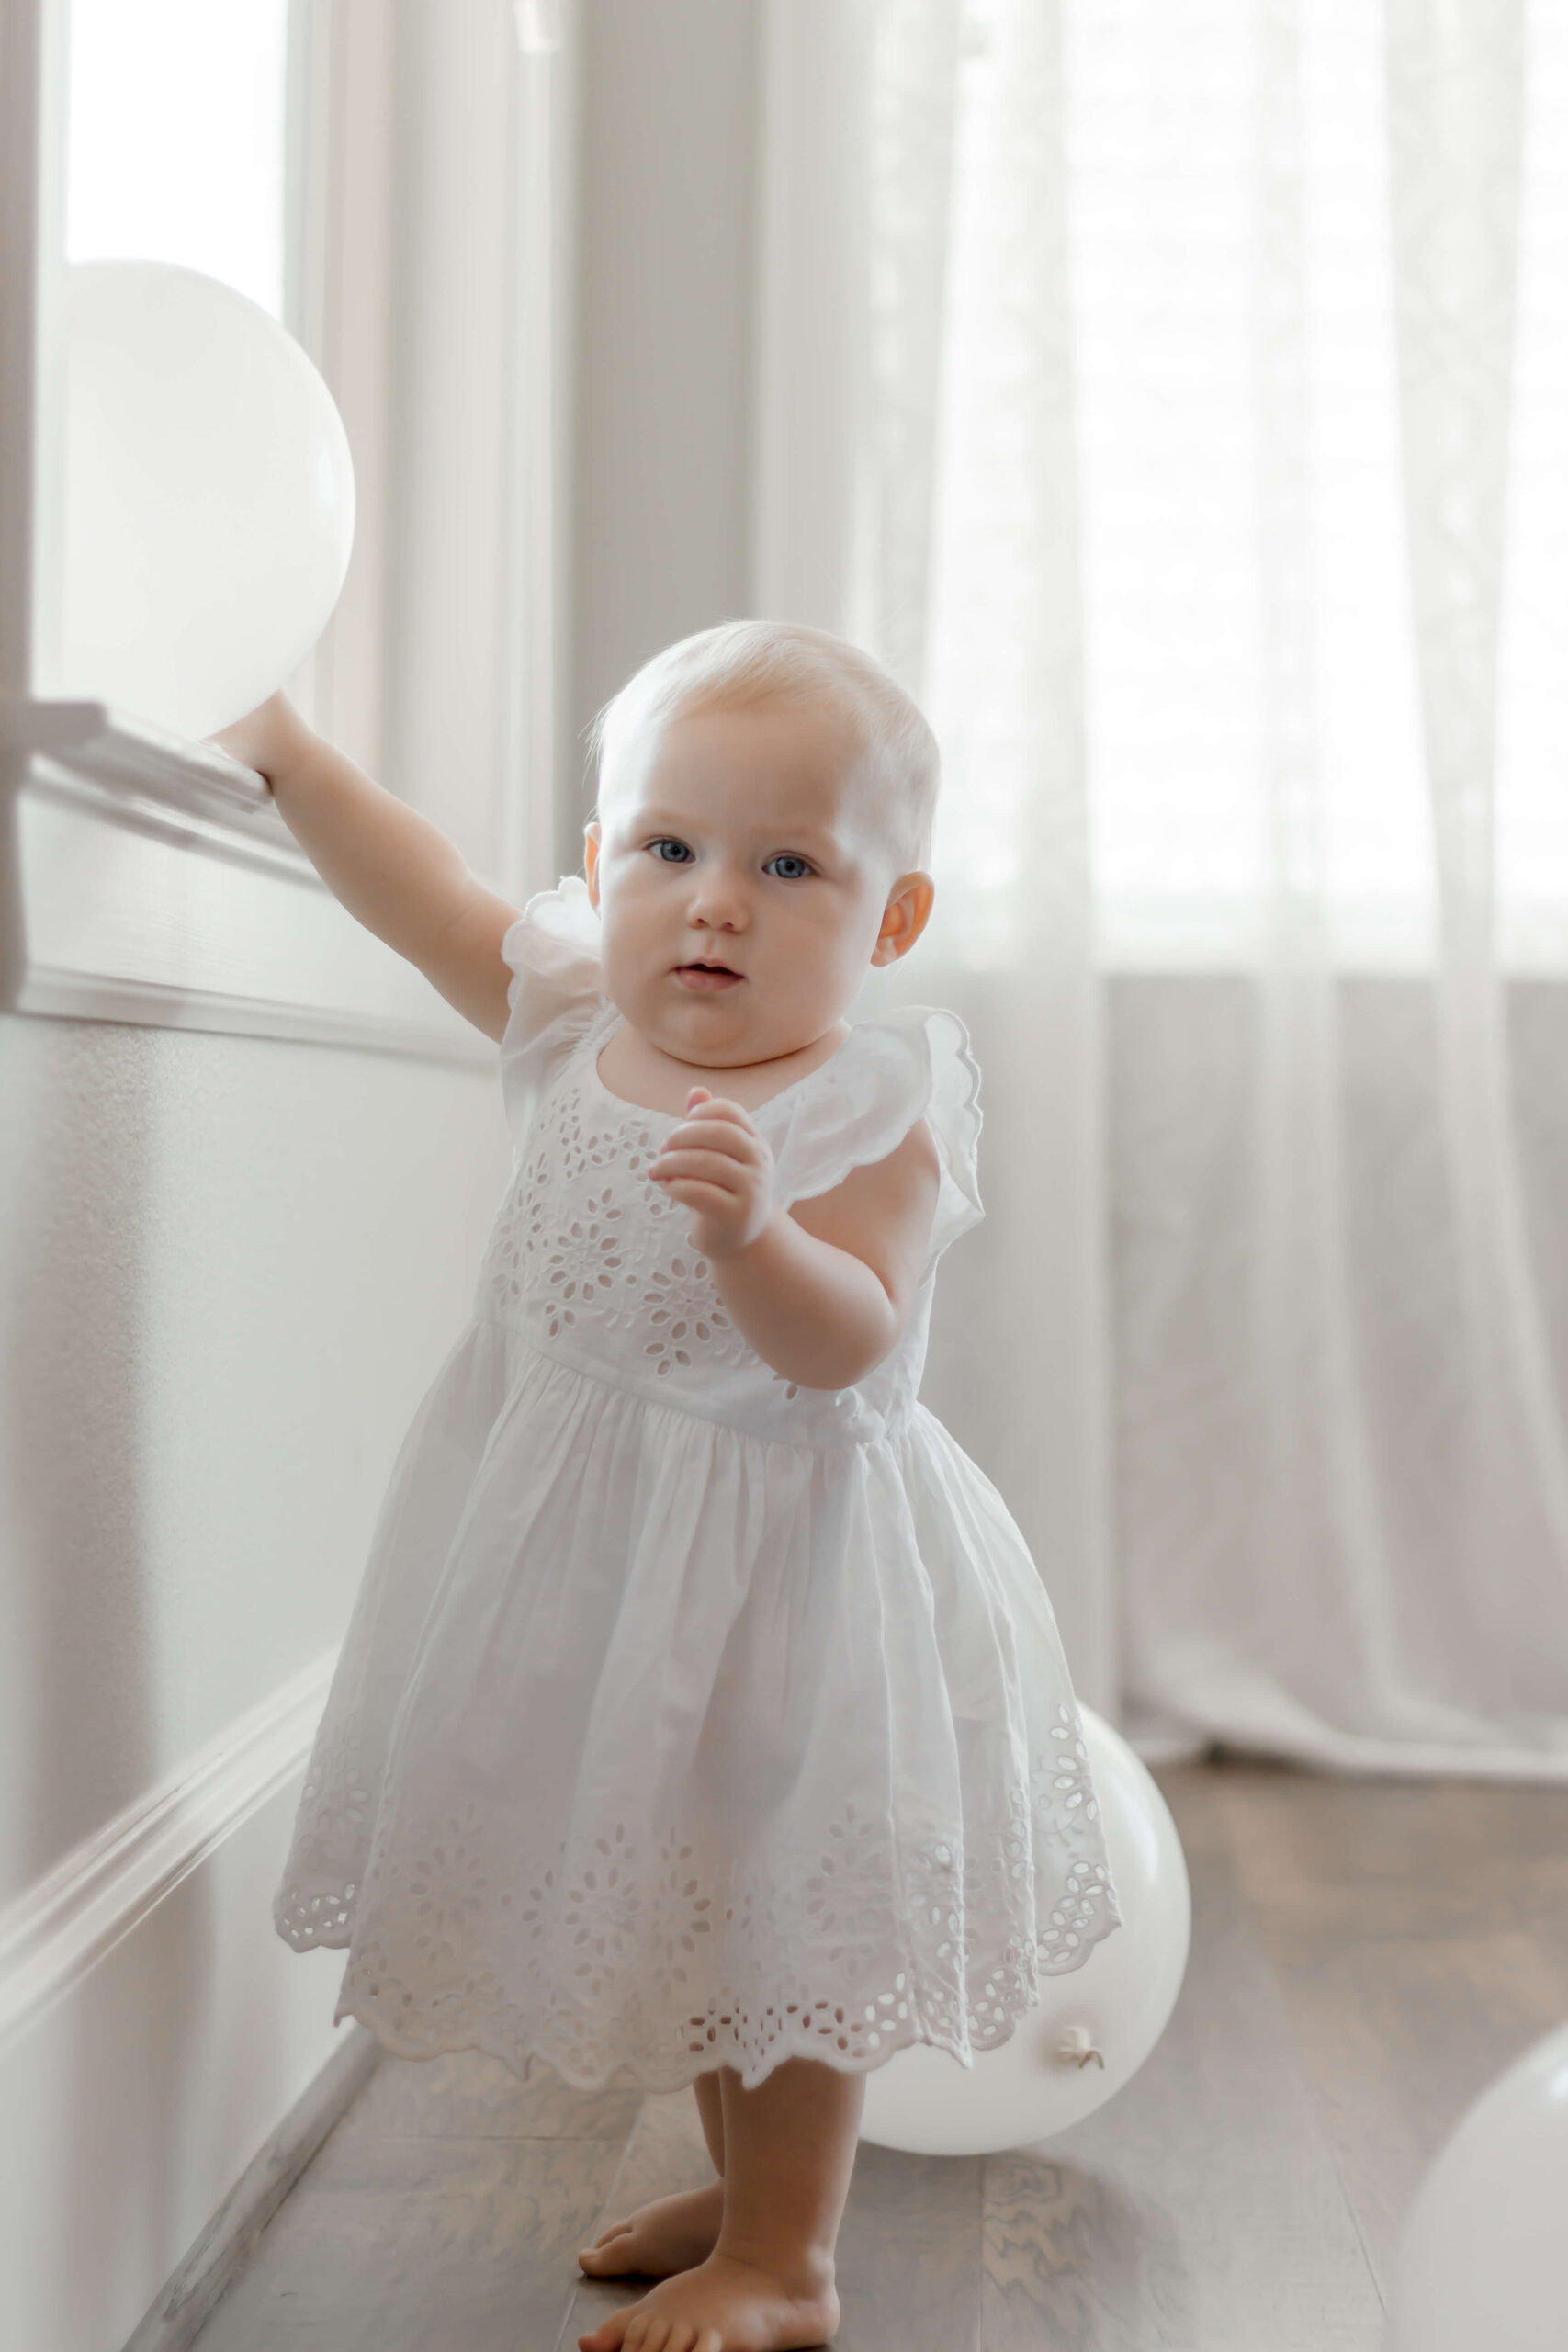 Girl playing with balloon, wearing white dress for first birthday.